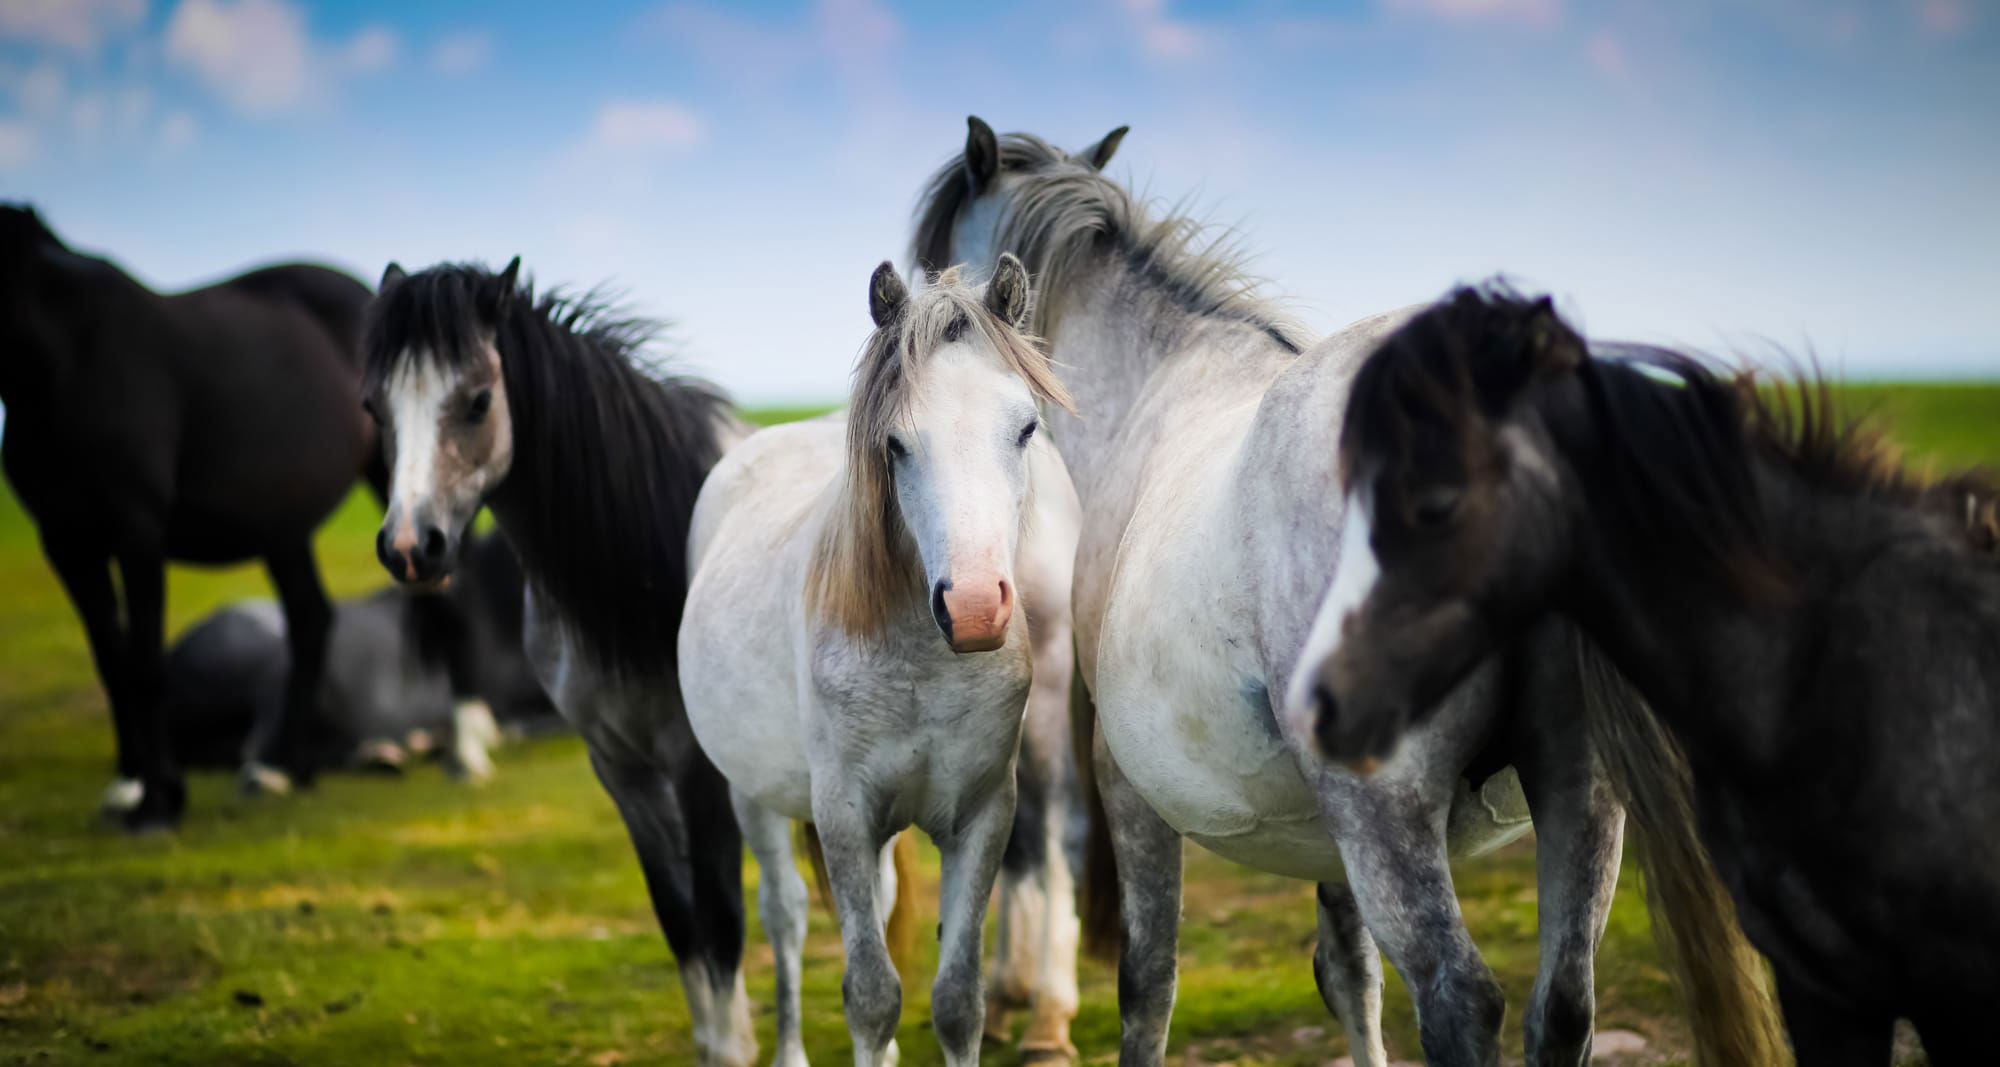 Horses buying, sharing, loans, leasing & care